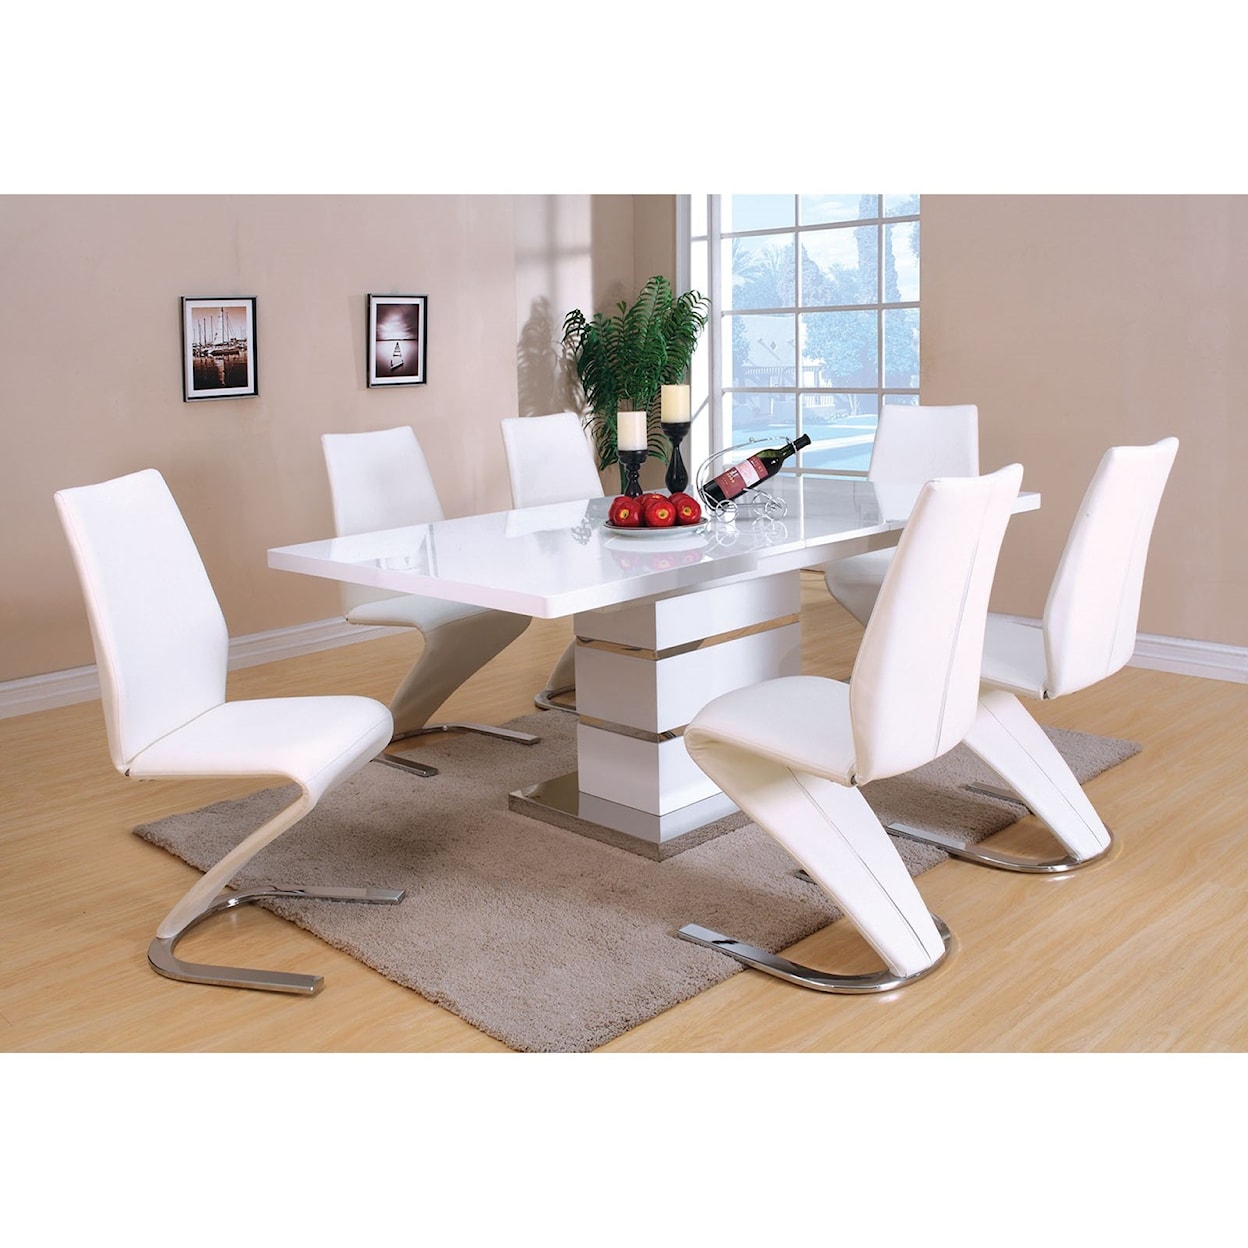 Furniture of America Midvale Dining Table and Chairs Set